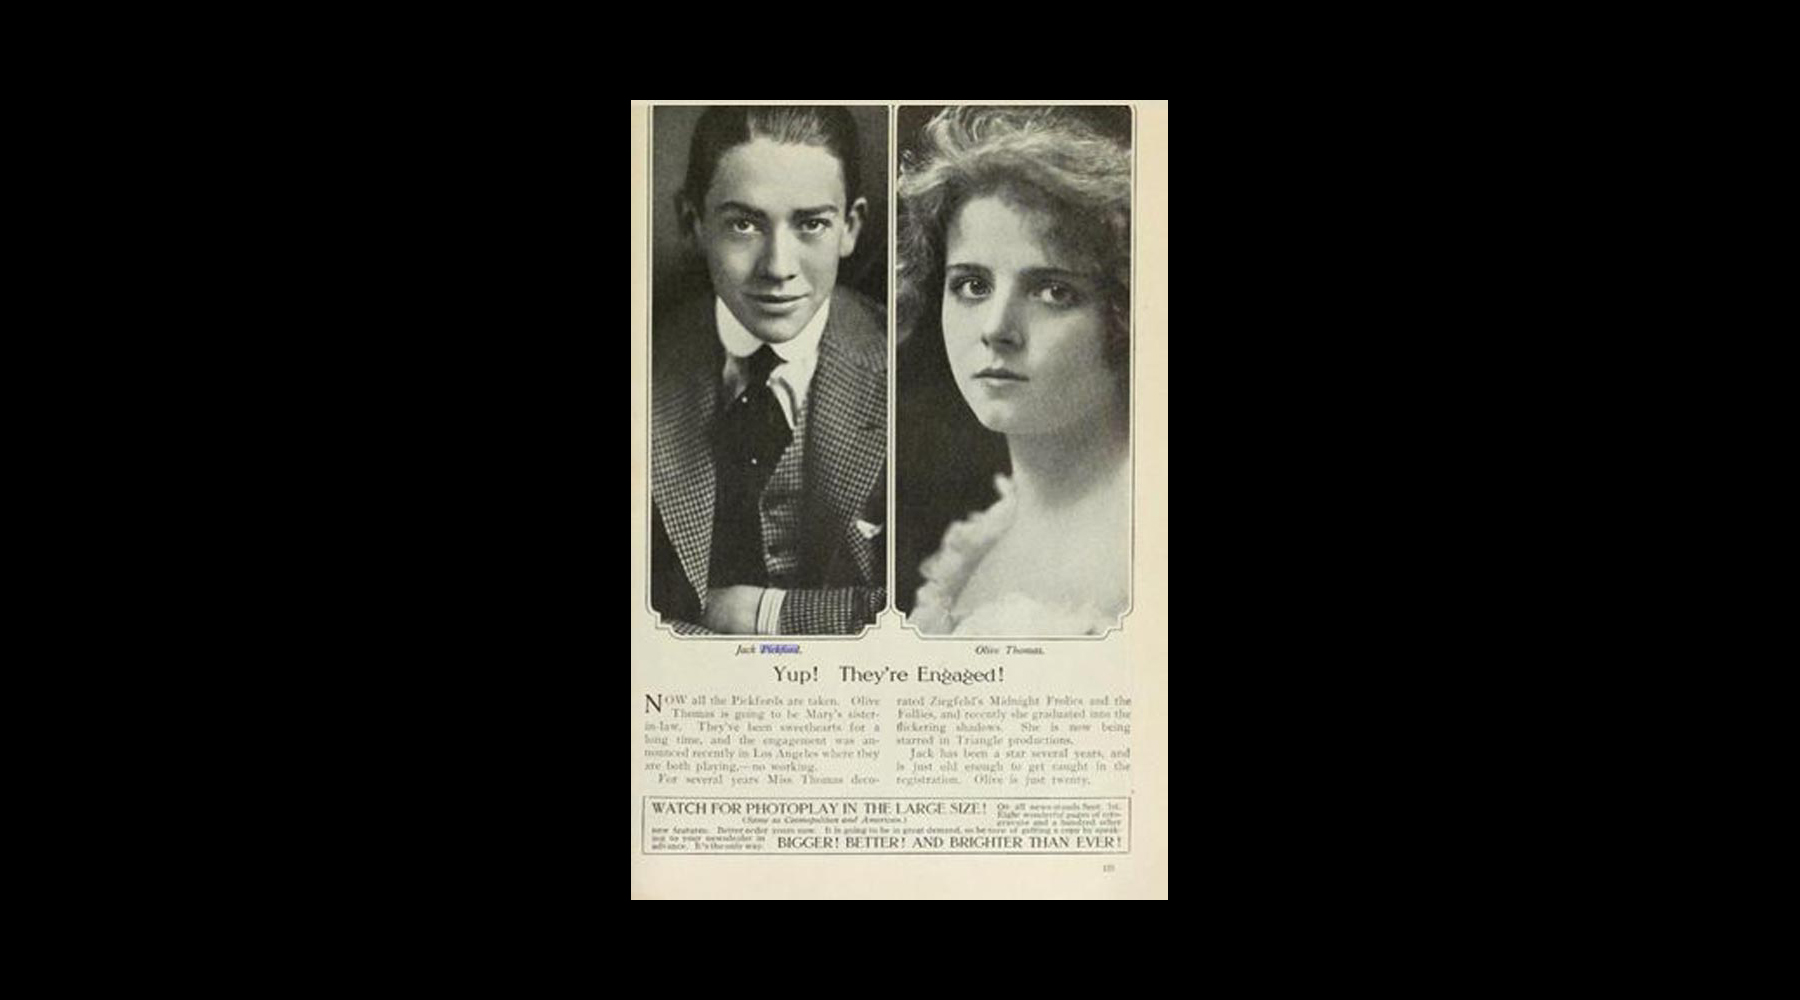 Olive and Jack Pickford, a famous actor, eloped on October 26, 1916. Their marriage was known to be tumultuous.